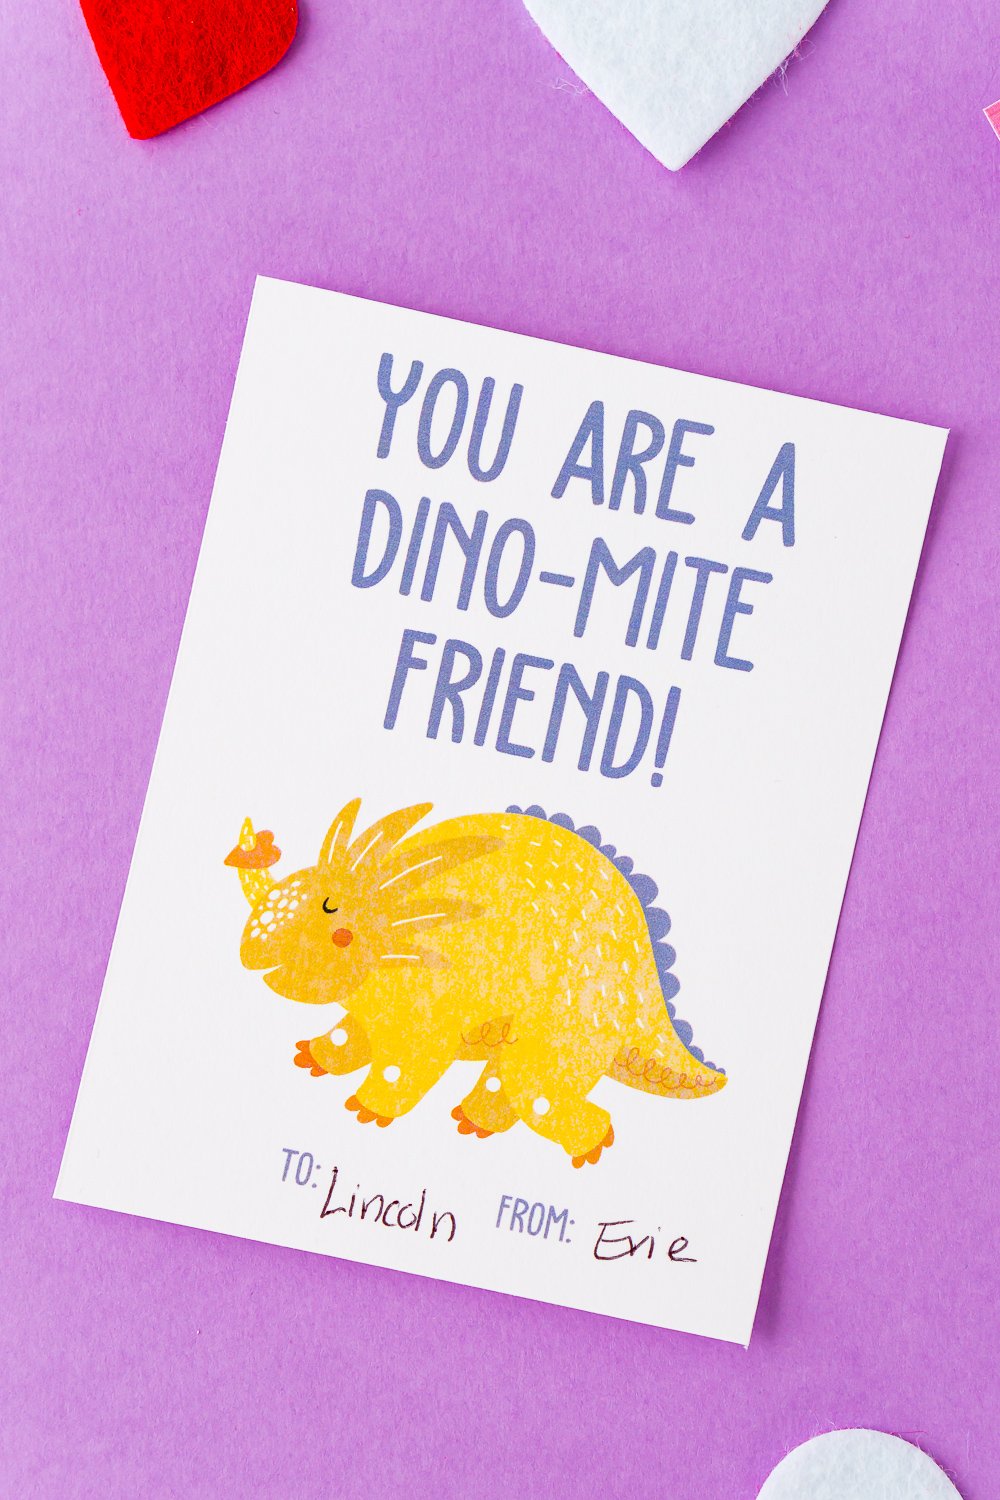 Make Valentine's Day a breeze with these Printable Dinosaur Valentine Cards with cute sayings your kids will love giving.